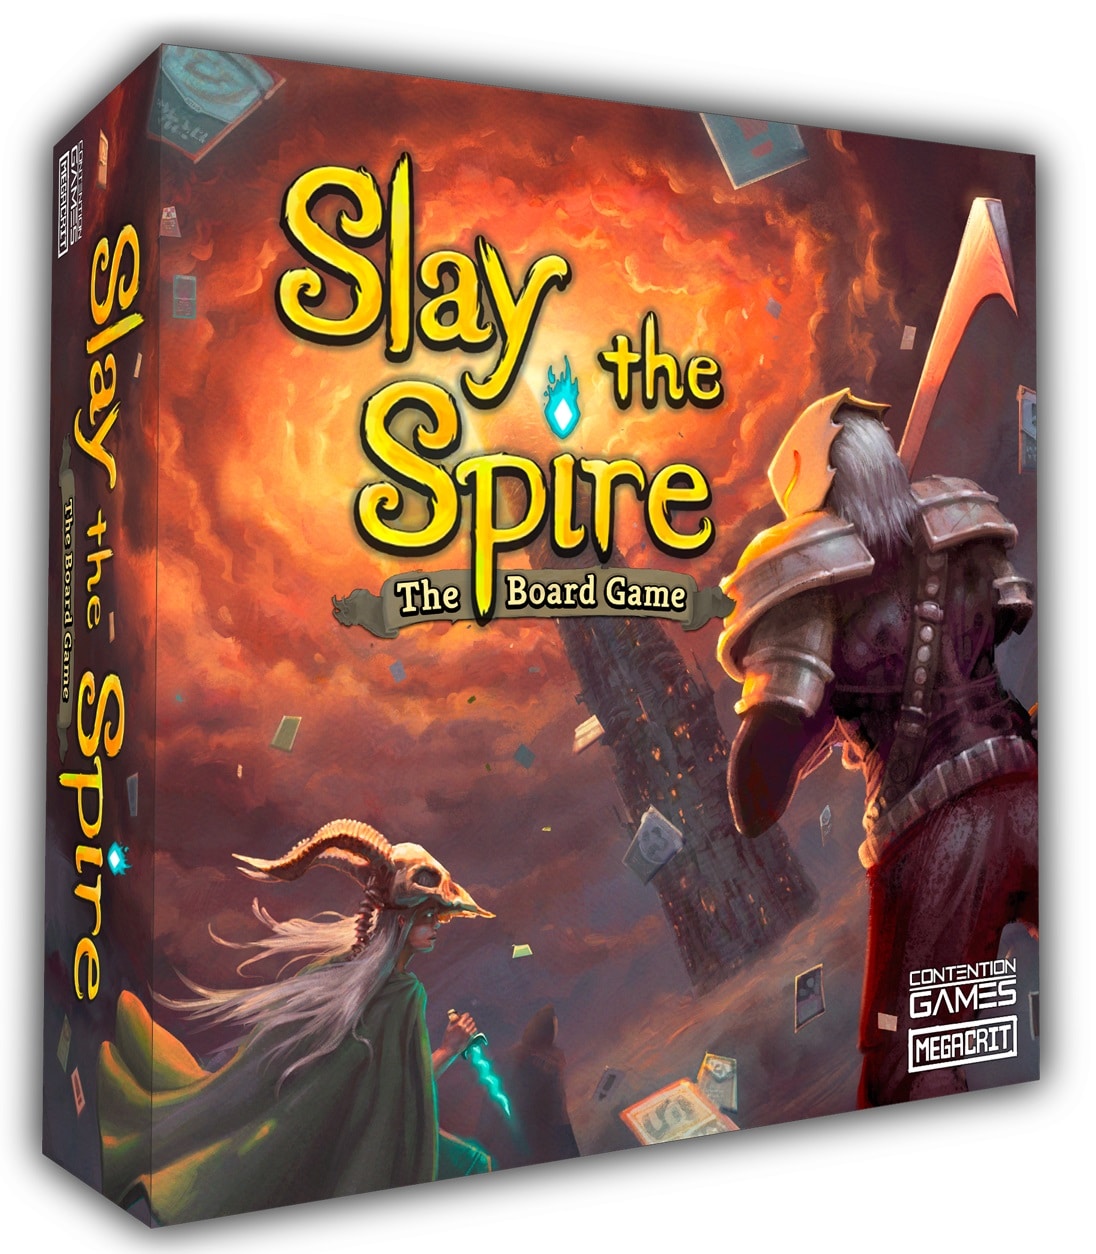 Slay the spire board game